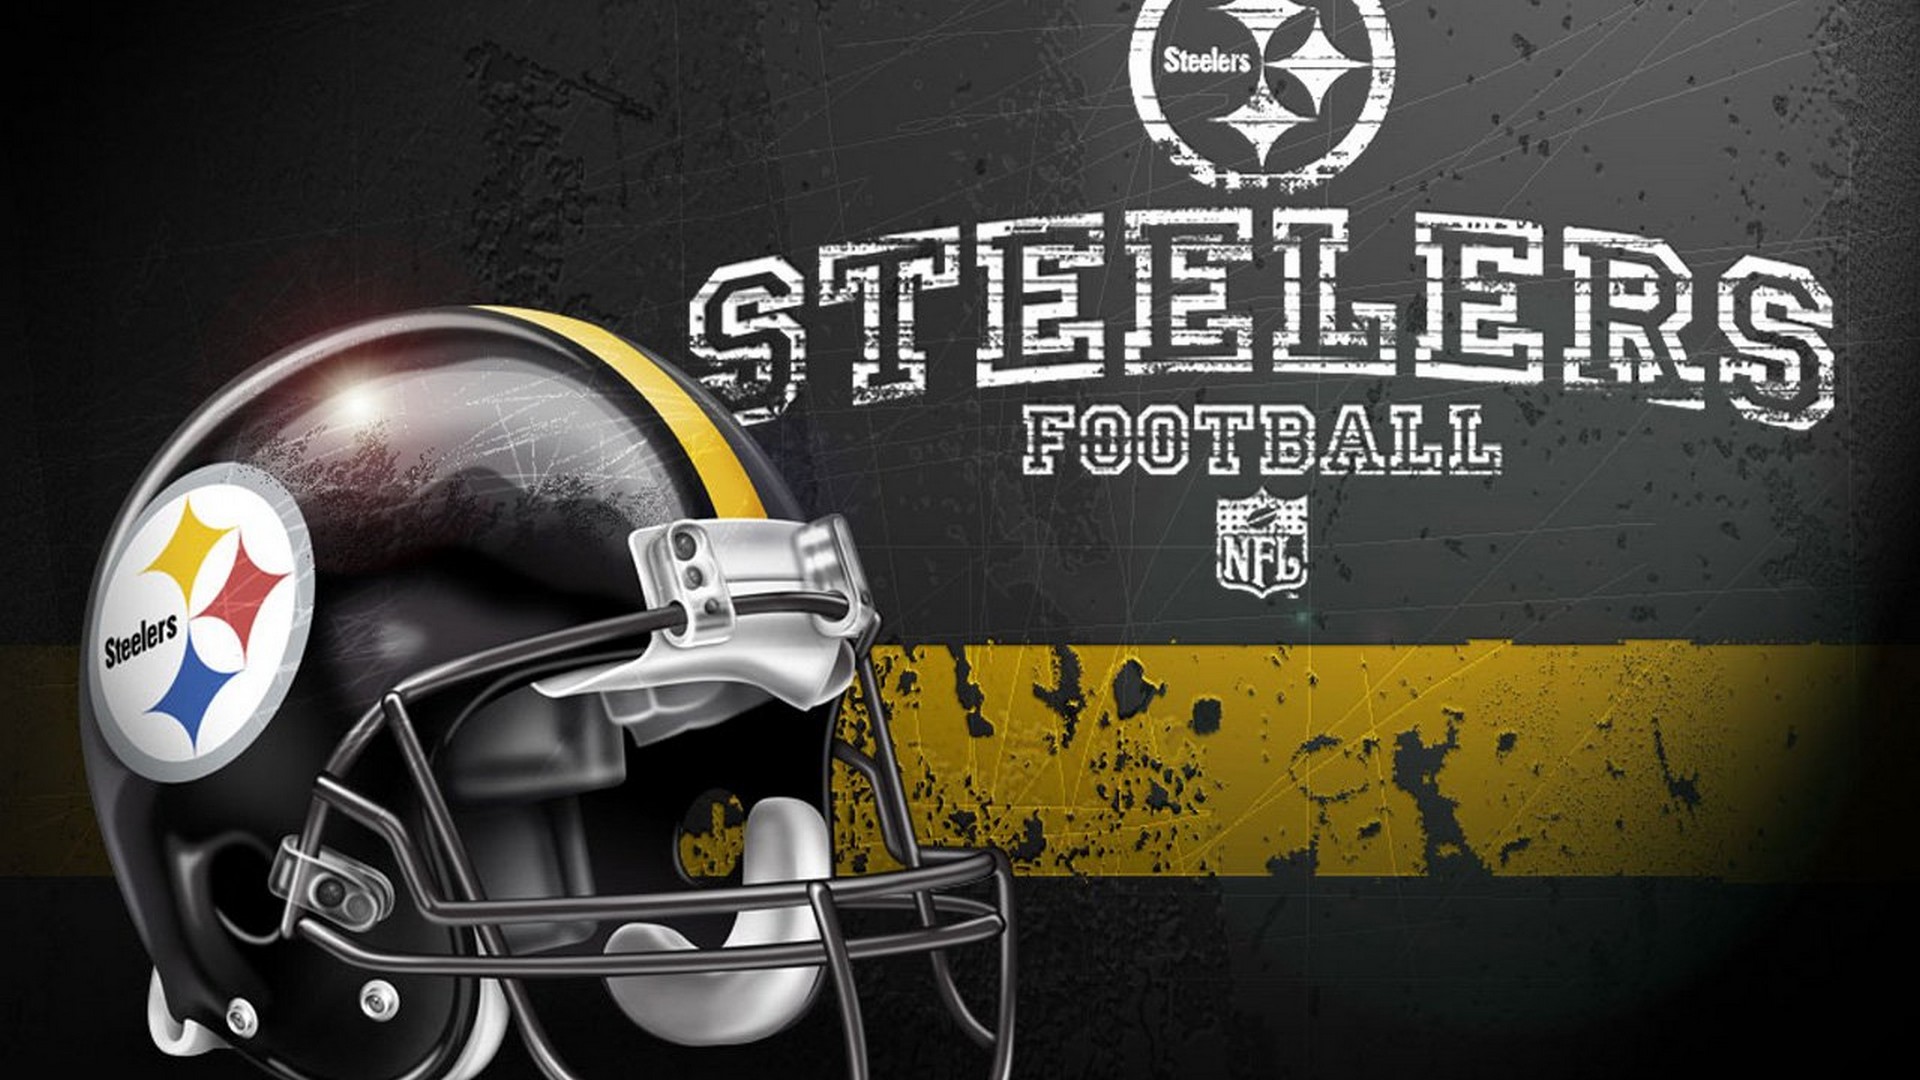 Steelers Wallpaper For Mac Backgrounds with resolution 1920x1080 pixel. You can make this wallpaper for your Mac or Windows Desktop Background, iPhone, Android or Tablet and another Smartphone device